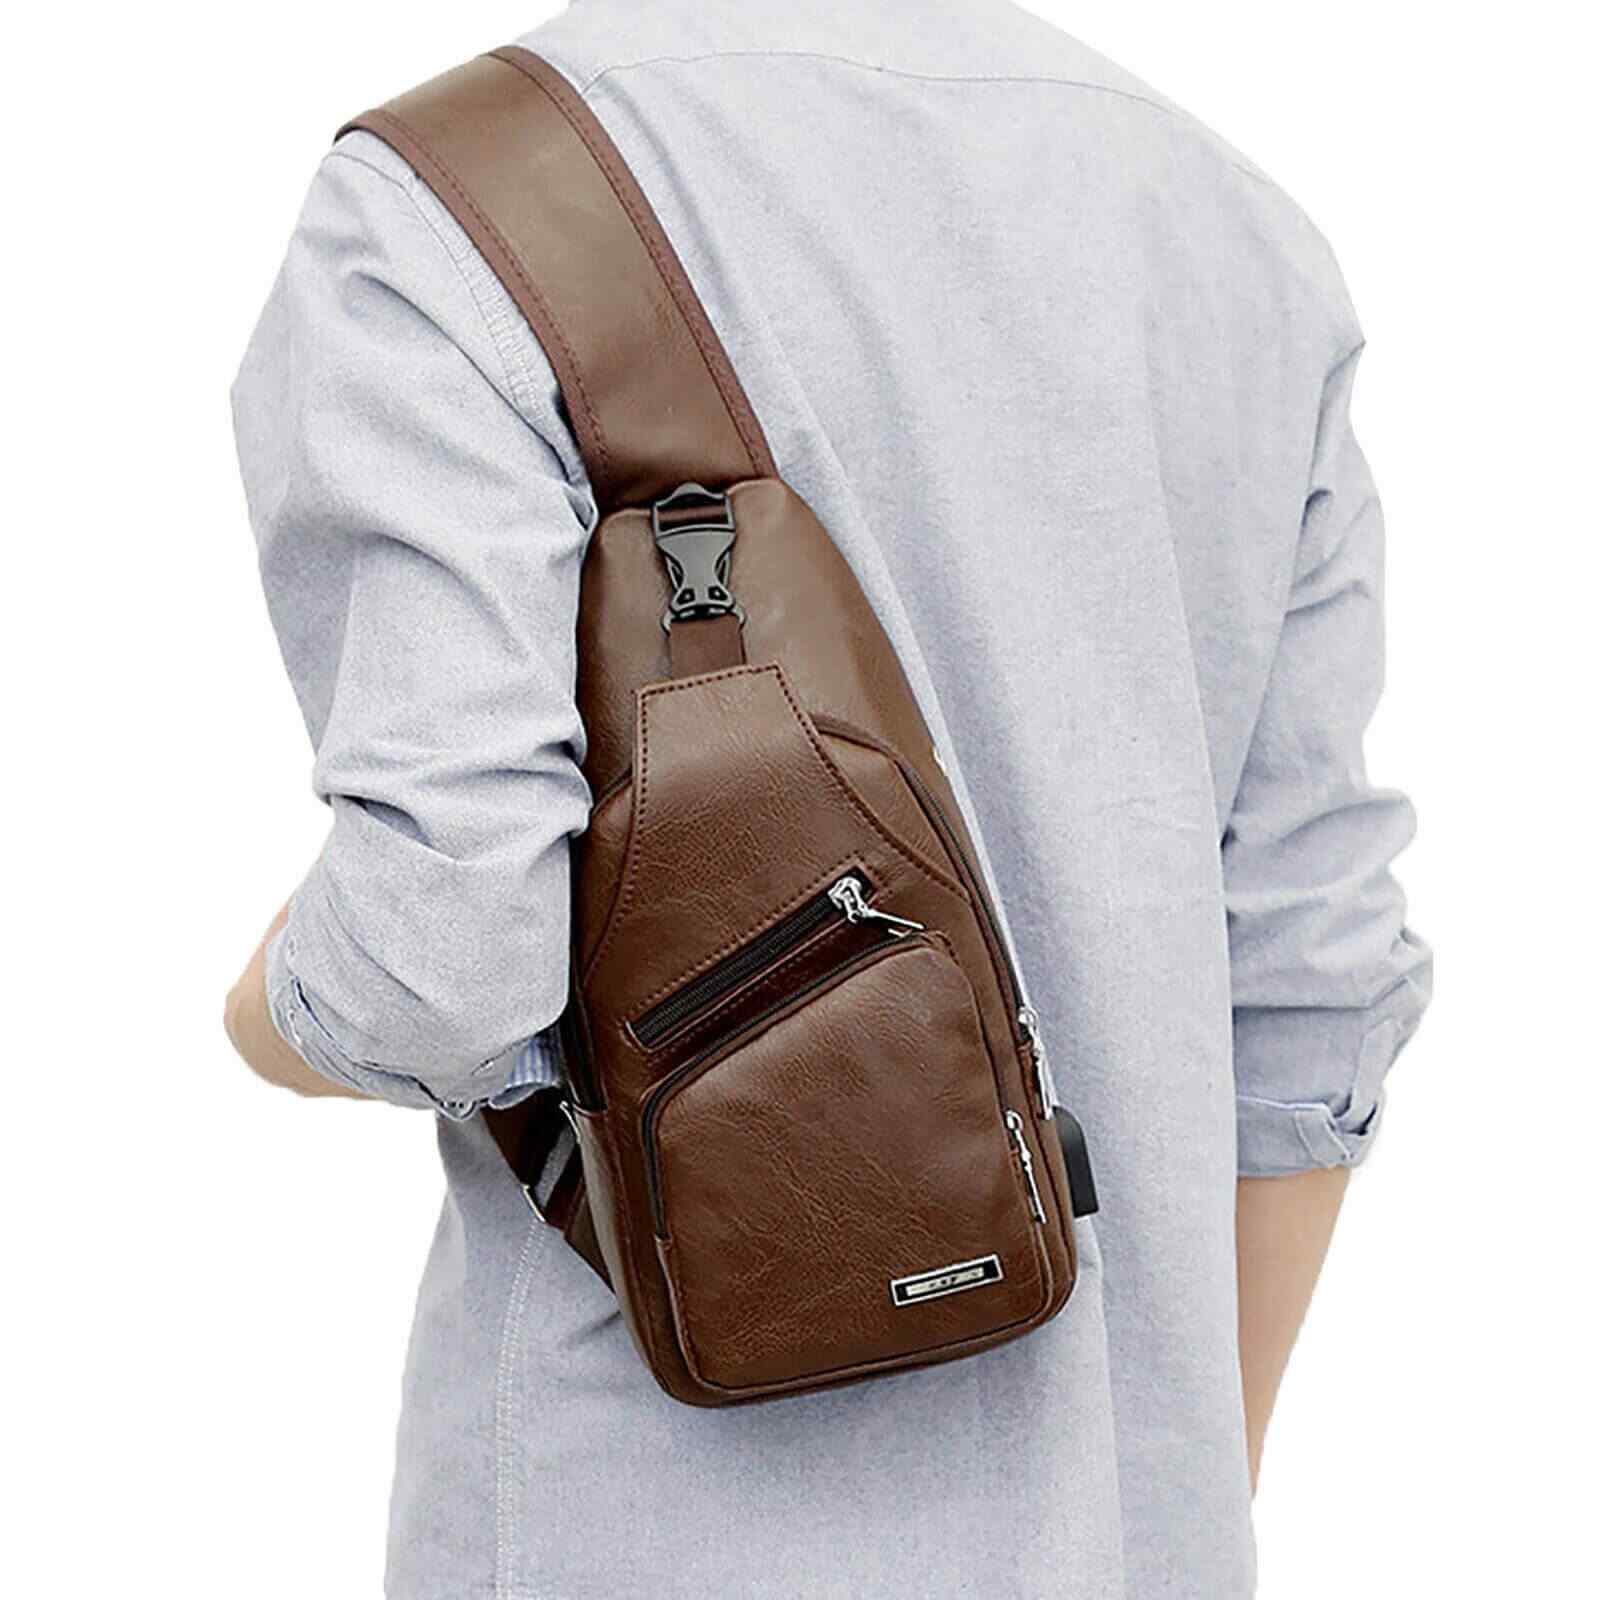 Showing of Leather Crossbody Sling Chest Bag w/ USB Charge Port